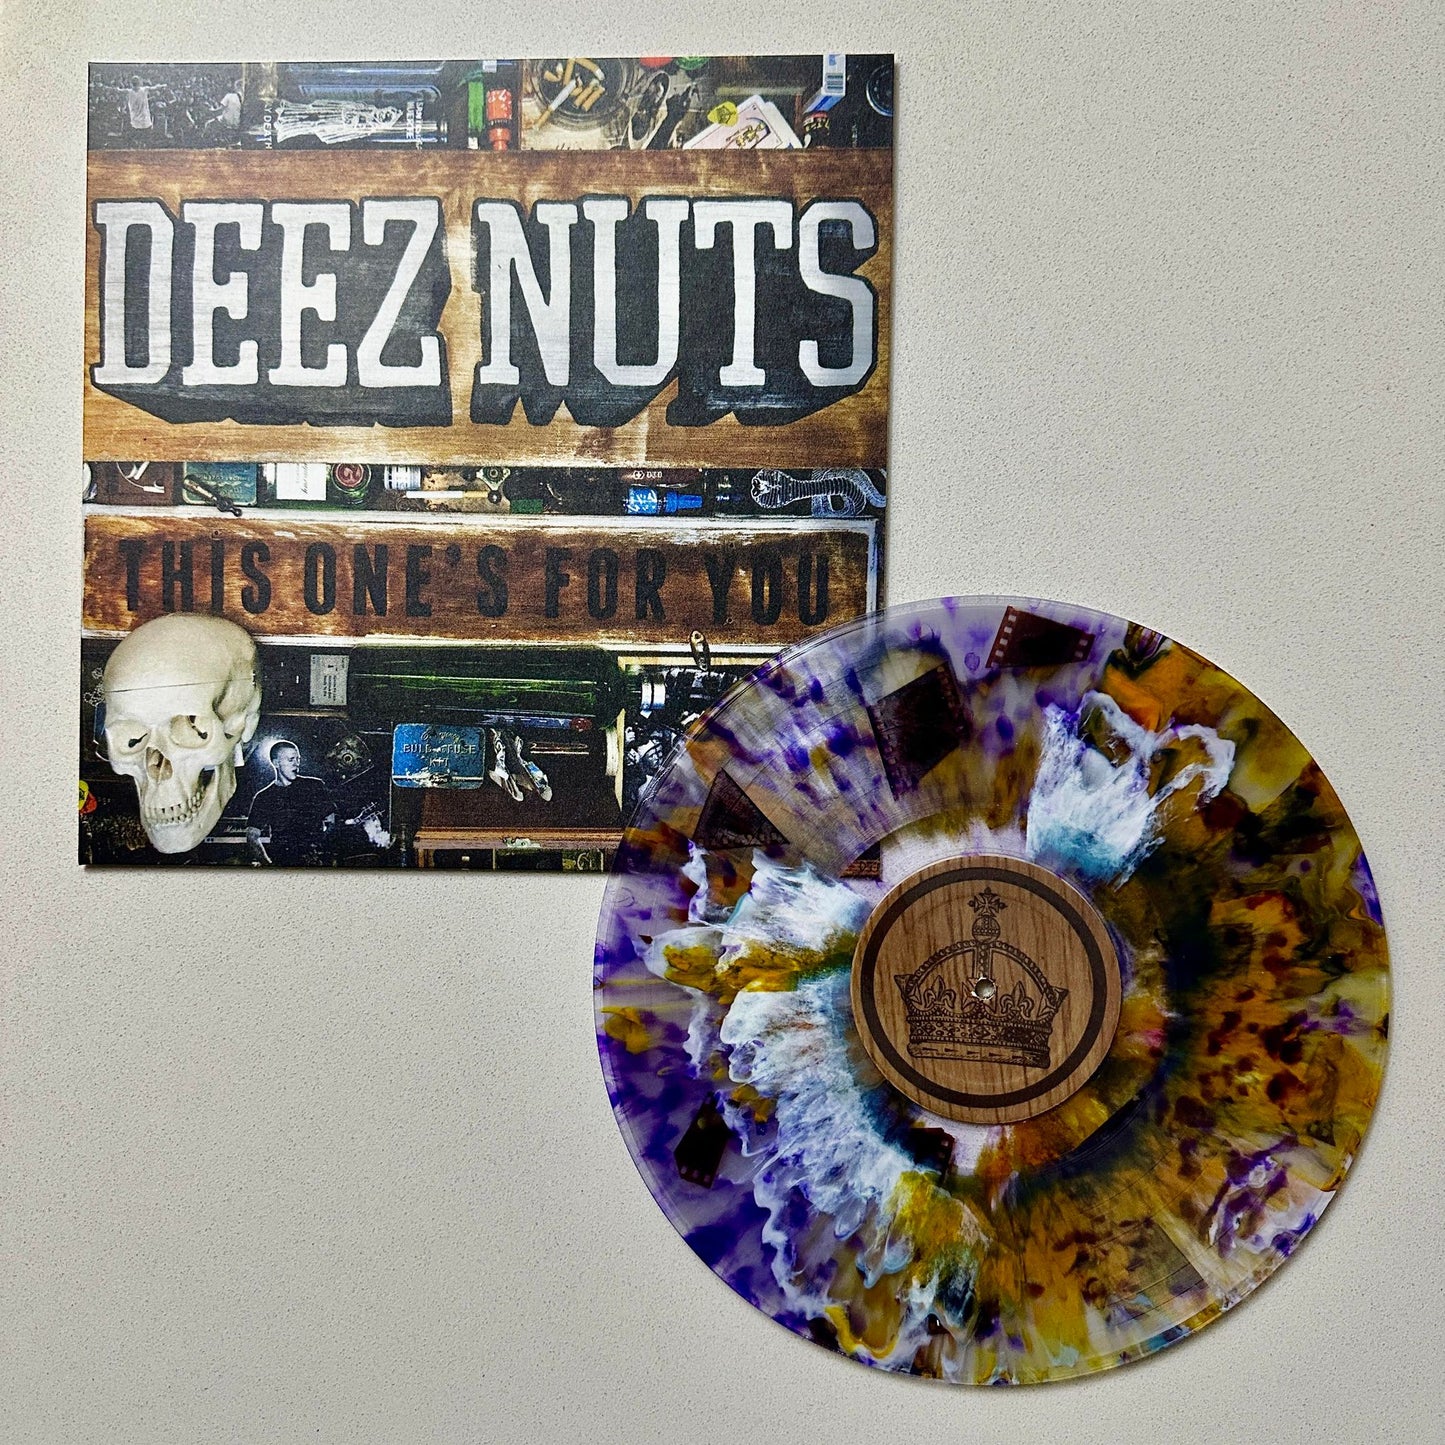 Deez Nuts - This Ones For You (SCRDD011)